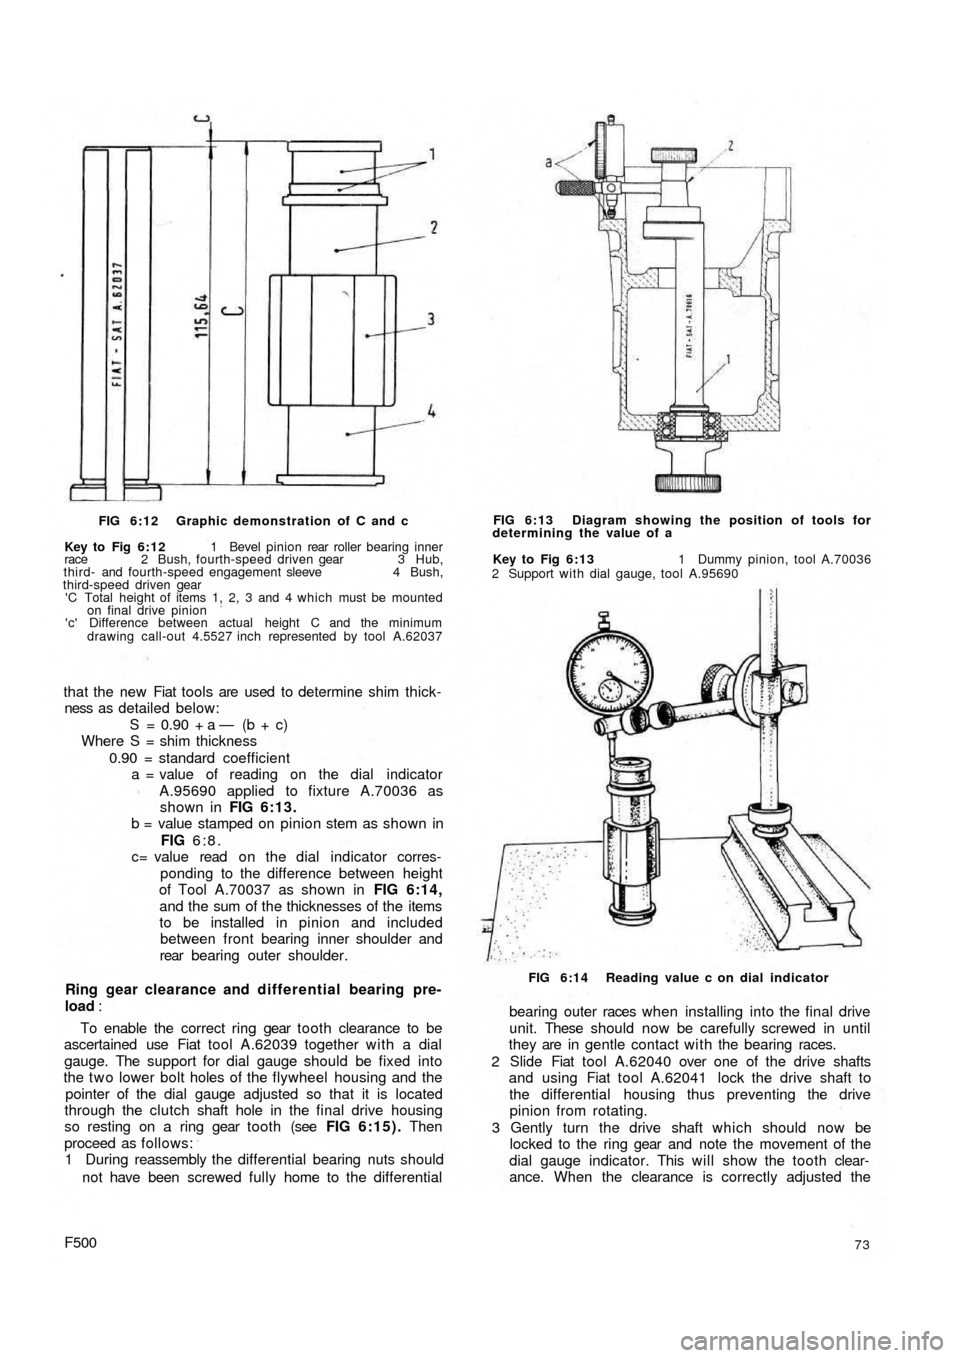 FIAT 500 1971 1.G Workshop Manual FIG 6:12 Graphic demonstration  of C and c
Key to Fig 6:12 1 Bevel pinion rear roller bearing inner
race 2 Bush, fourth-speed driven gear 3 Hub,
third- and fourth-speed engagement sleeve 4 Bush,
third